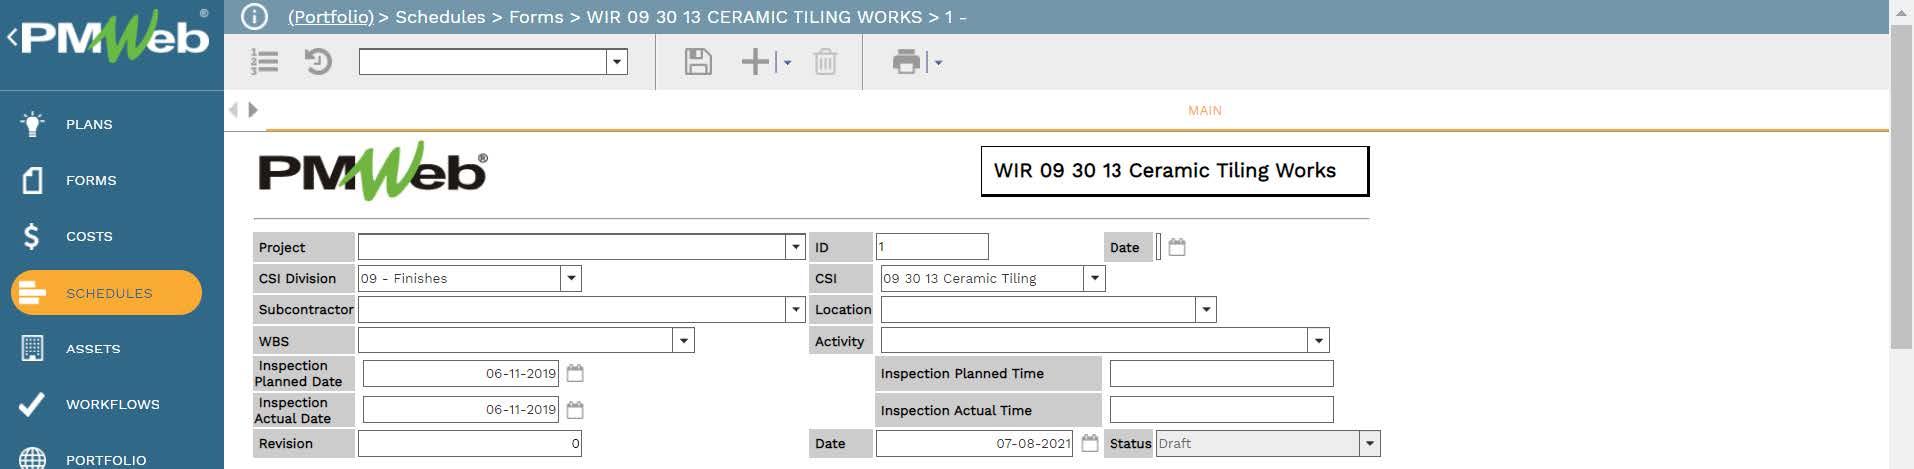 PMWeb 7 Schedules Forms WIR Ceramic Tiling Works
Main
